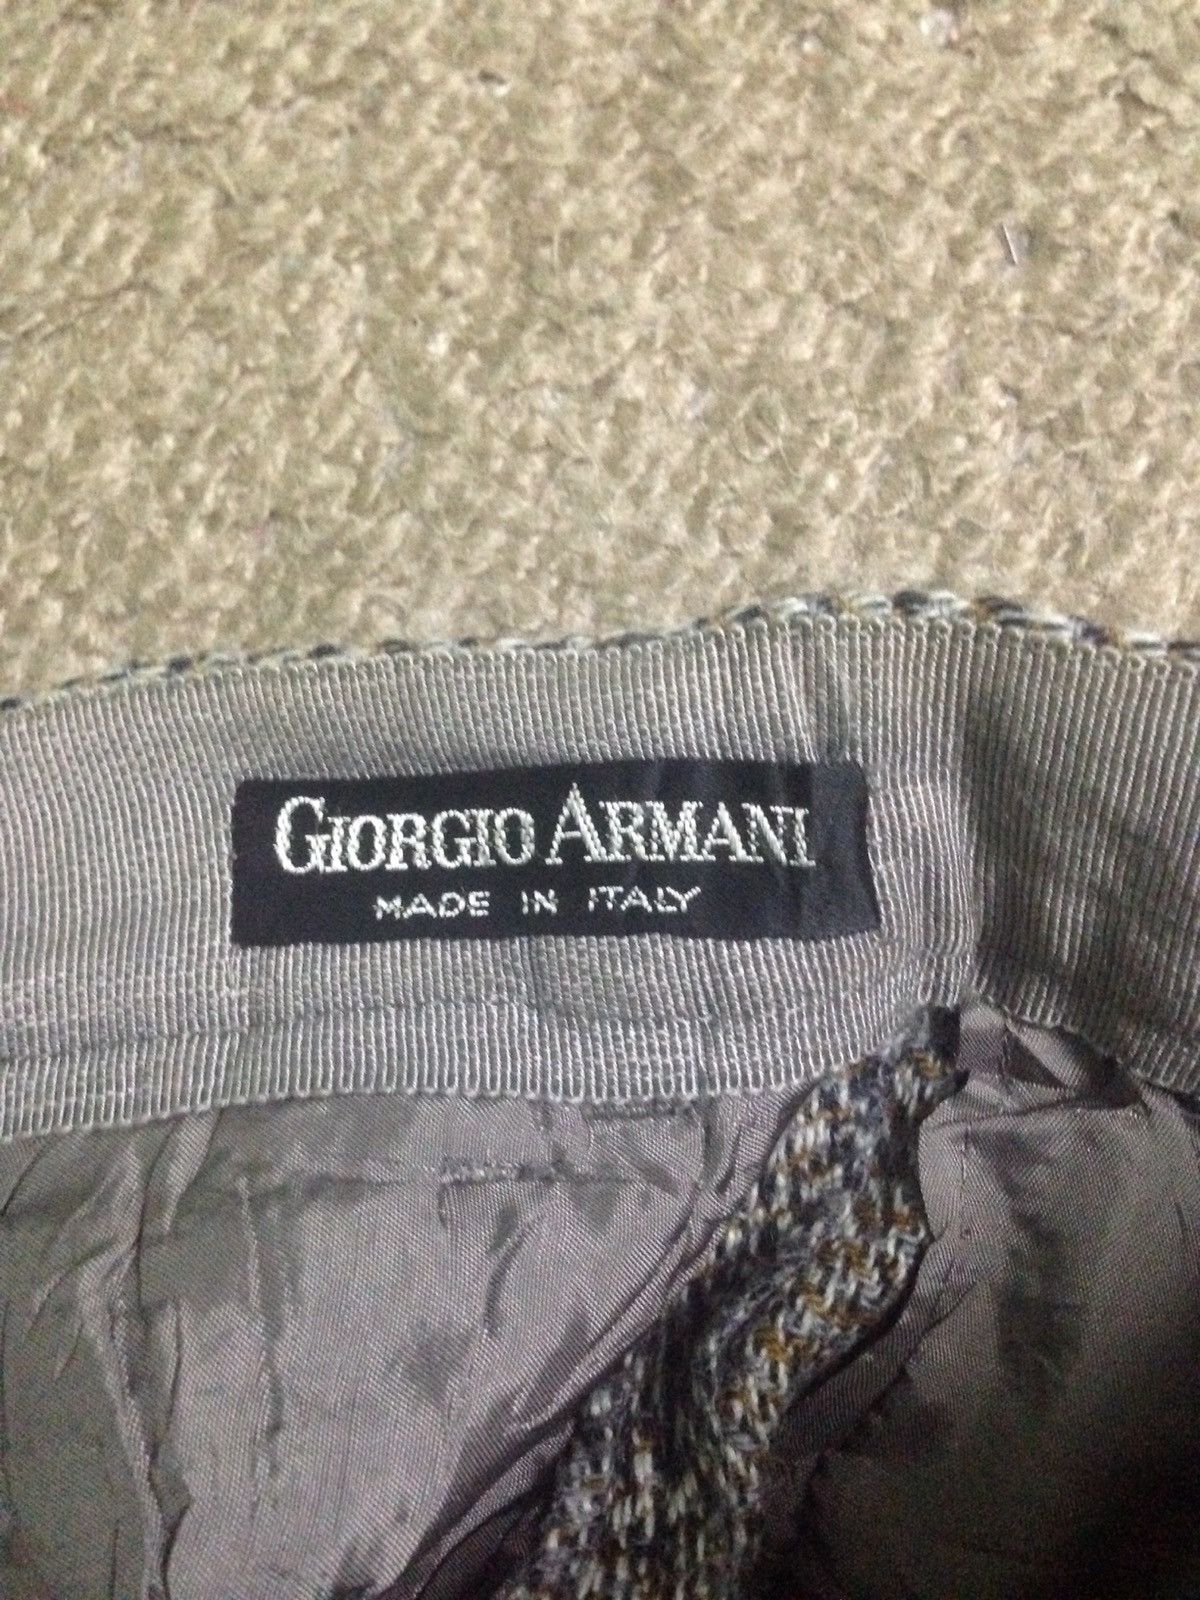 Vintage Giorgio Armani Wool Pants Made In Italy -R6 - 4